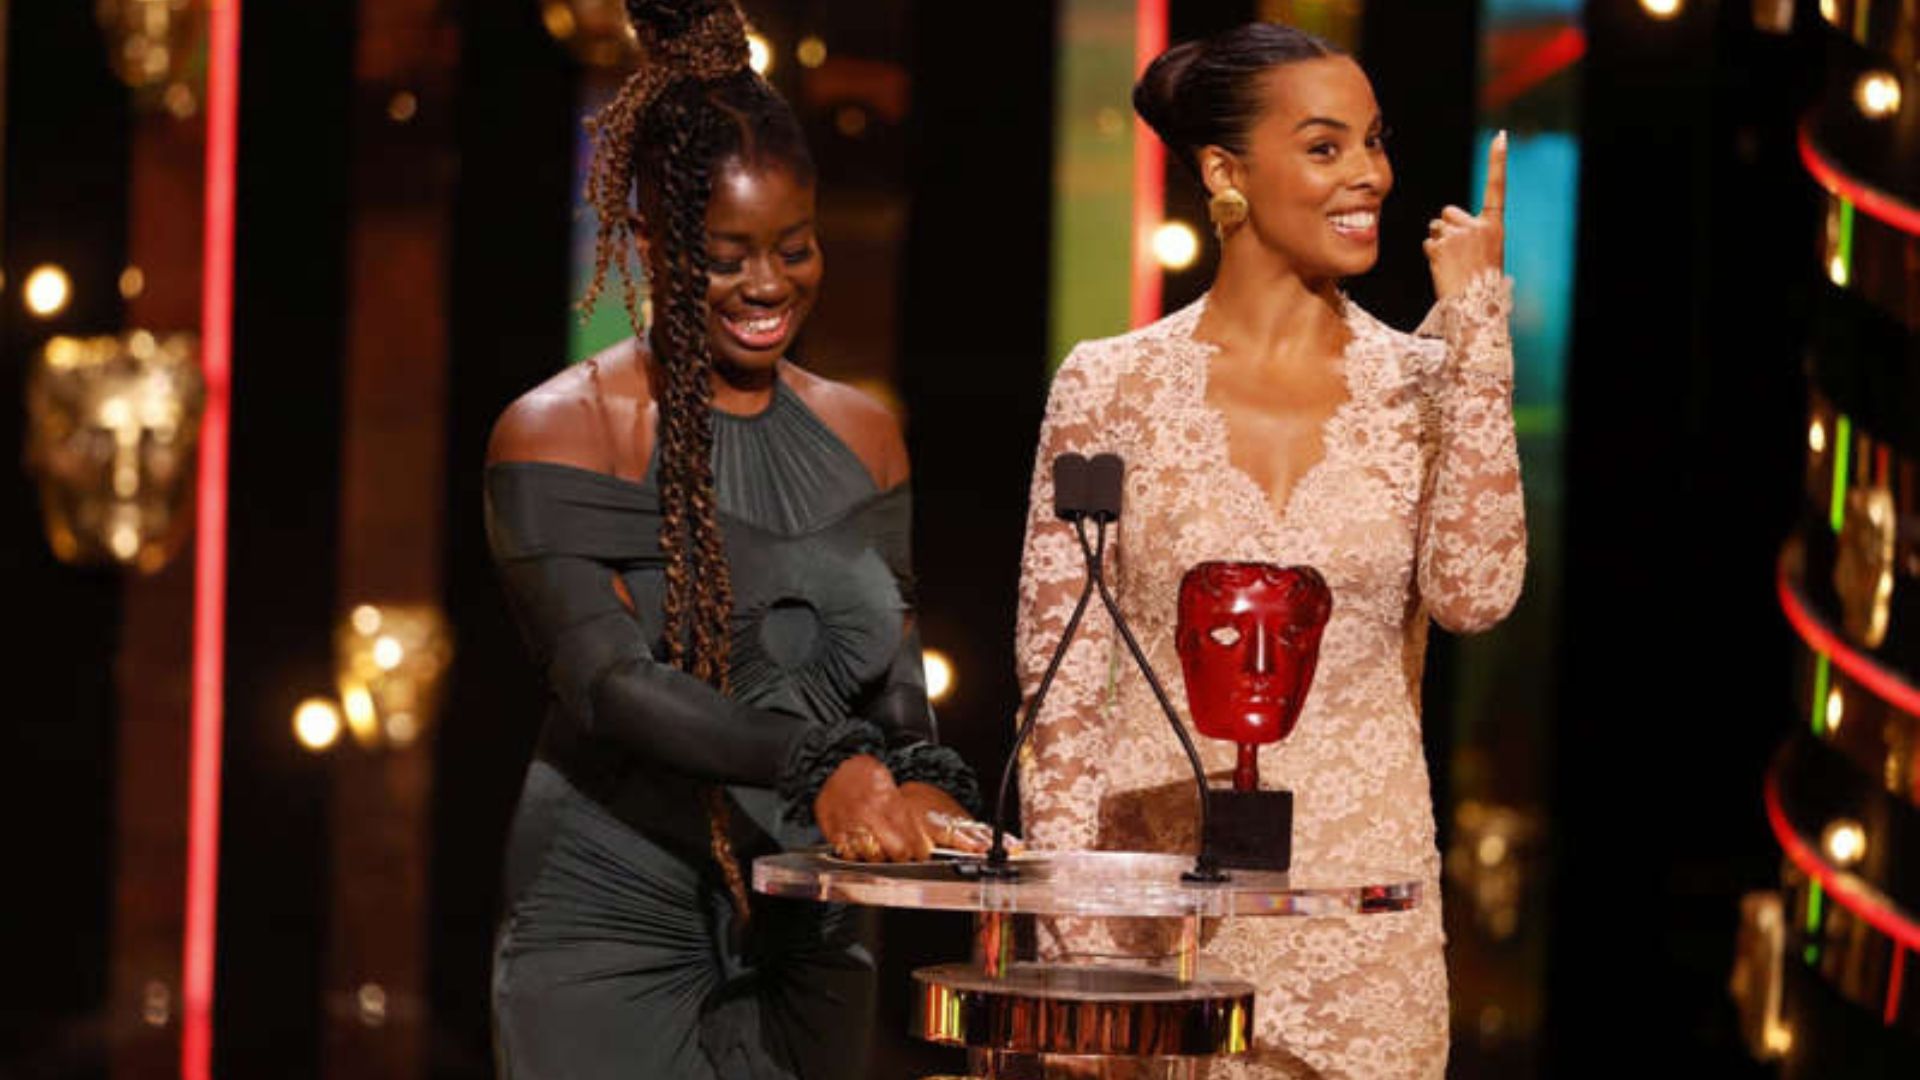 Baftas 2022 Rochelle Humes won hearts by utilizing sign language